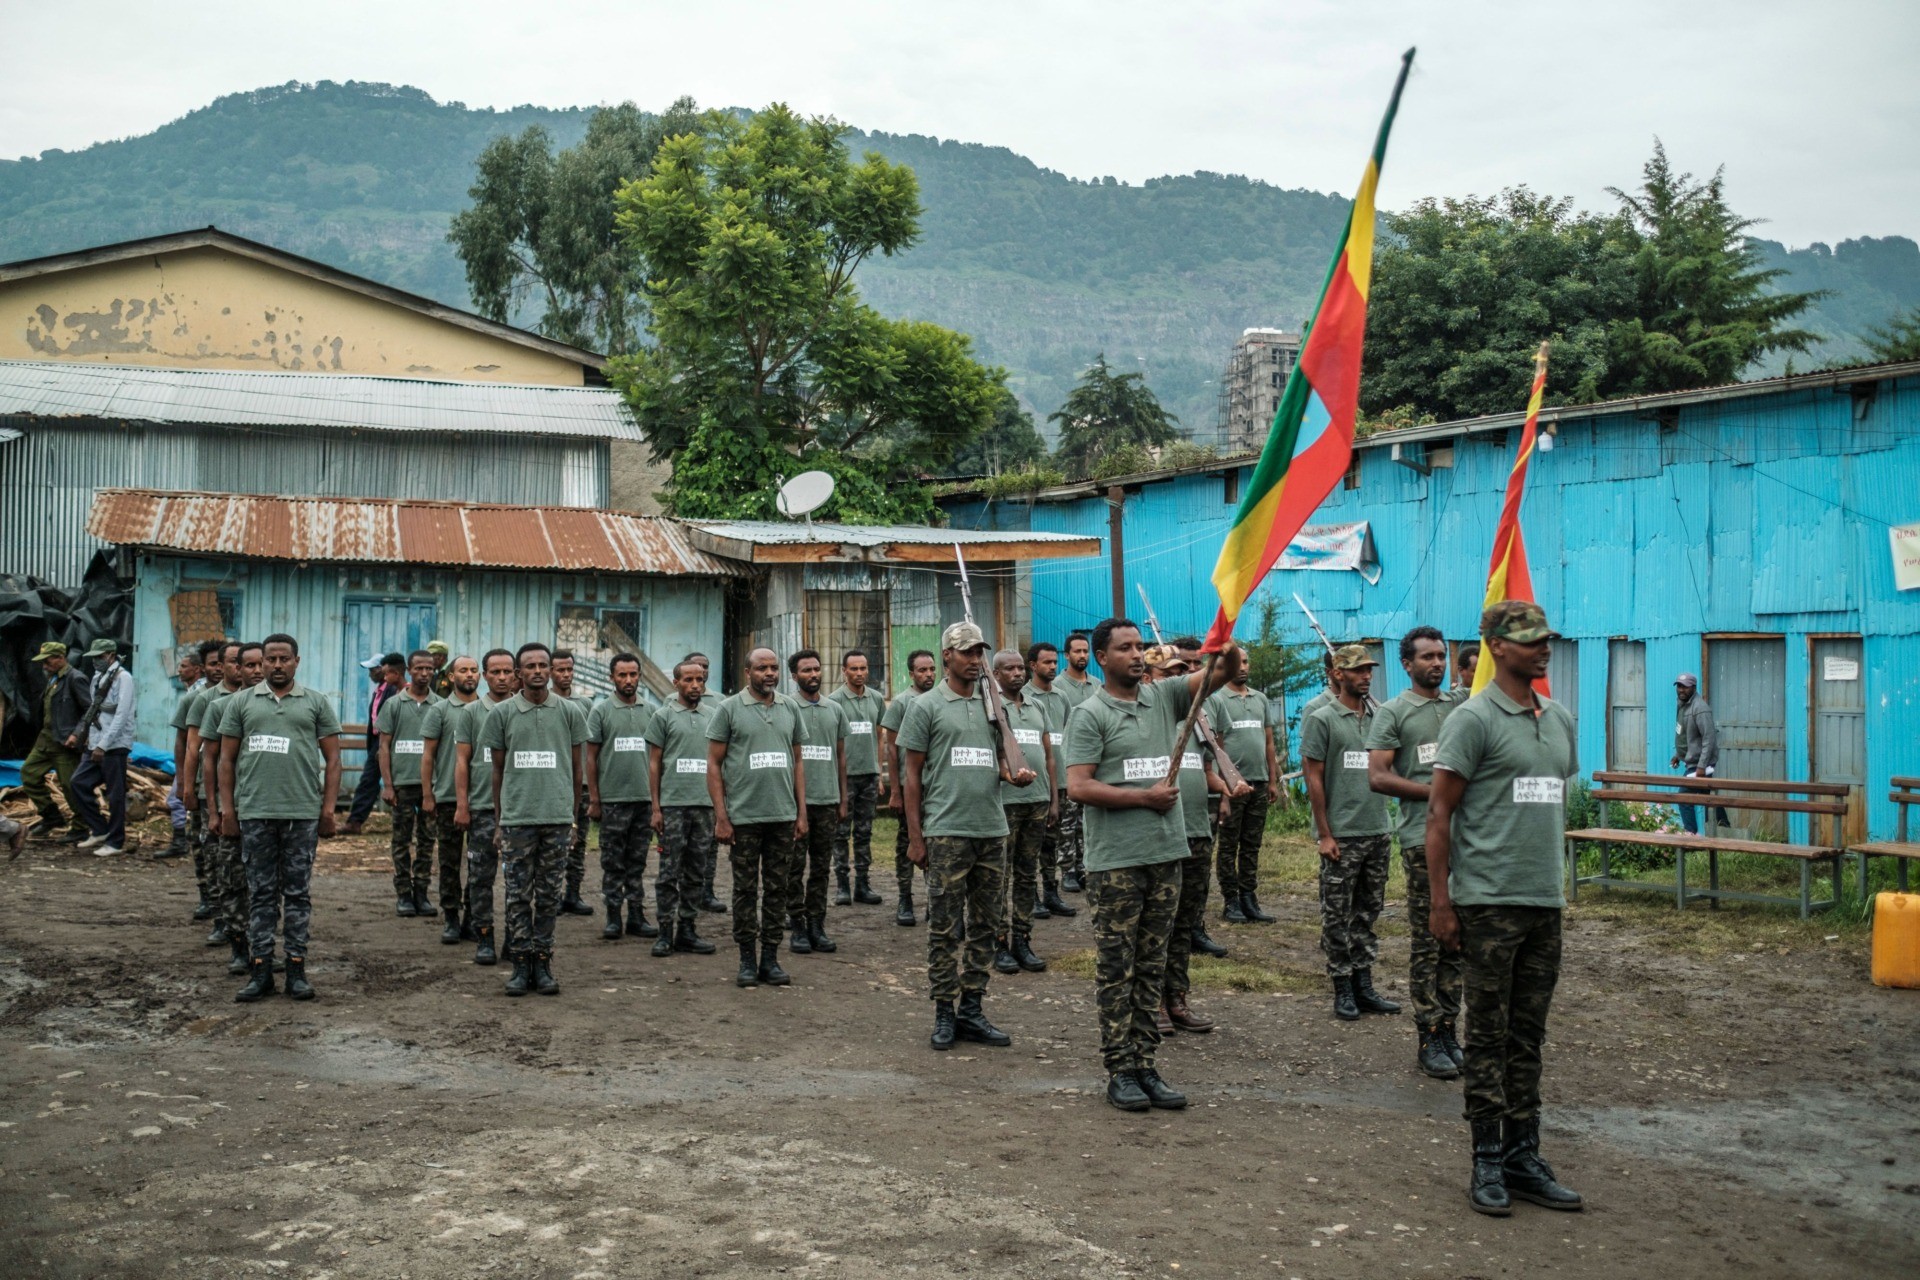 Recruits for reserves of Amhara regional forces stand during their graduation ceremony, in the city of Dessie, Ethiopia, on August 24, 2021. - Long confined to Tigray, the conflict in Ethiopia has recently spread to two neighbouring regions, Afar and Amhara, with heavy weapons fire killing an untold number of civilians and displacing hundreds of thousands more. (Photo by EDUARDO SOTERAS / AFP) (Photo by EDUARDO SOTERAS/AFP via Getty Images)